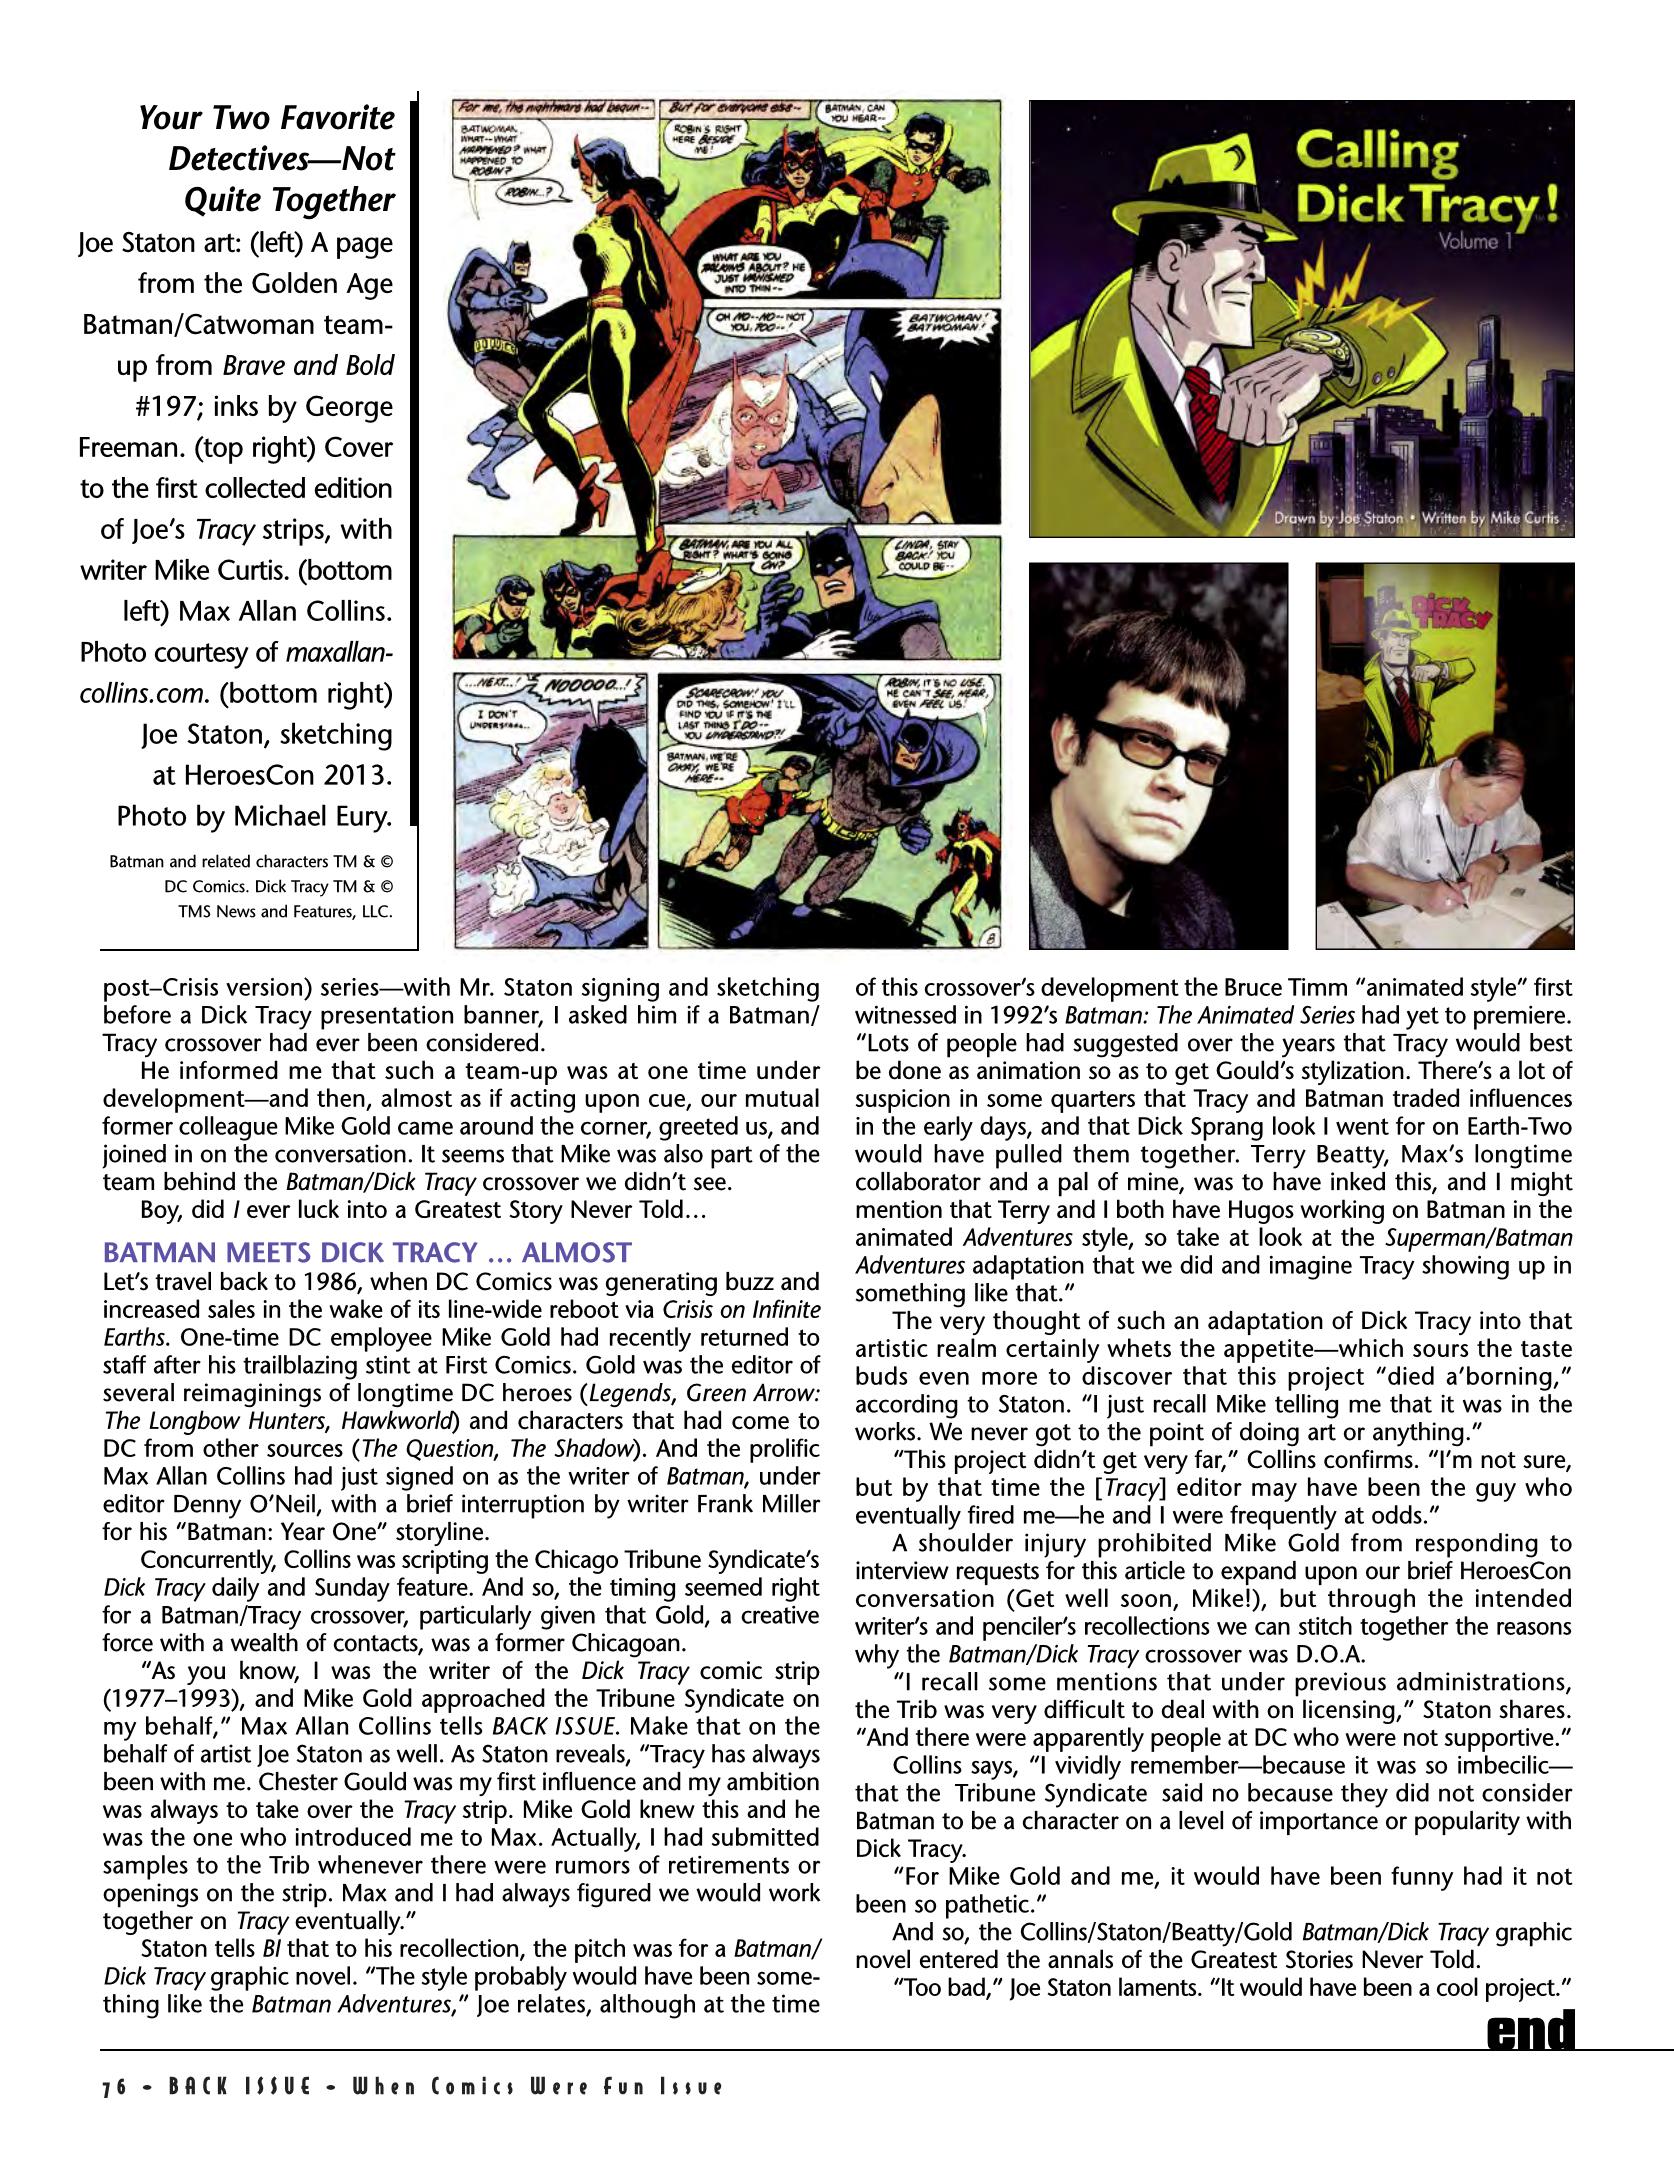 Read online Back Issue comic -  Issue #77 - 76